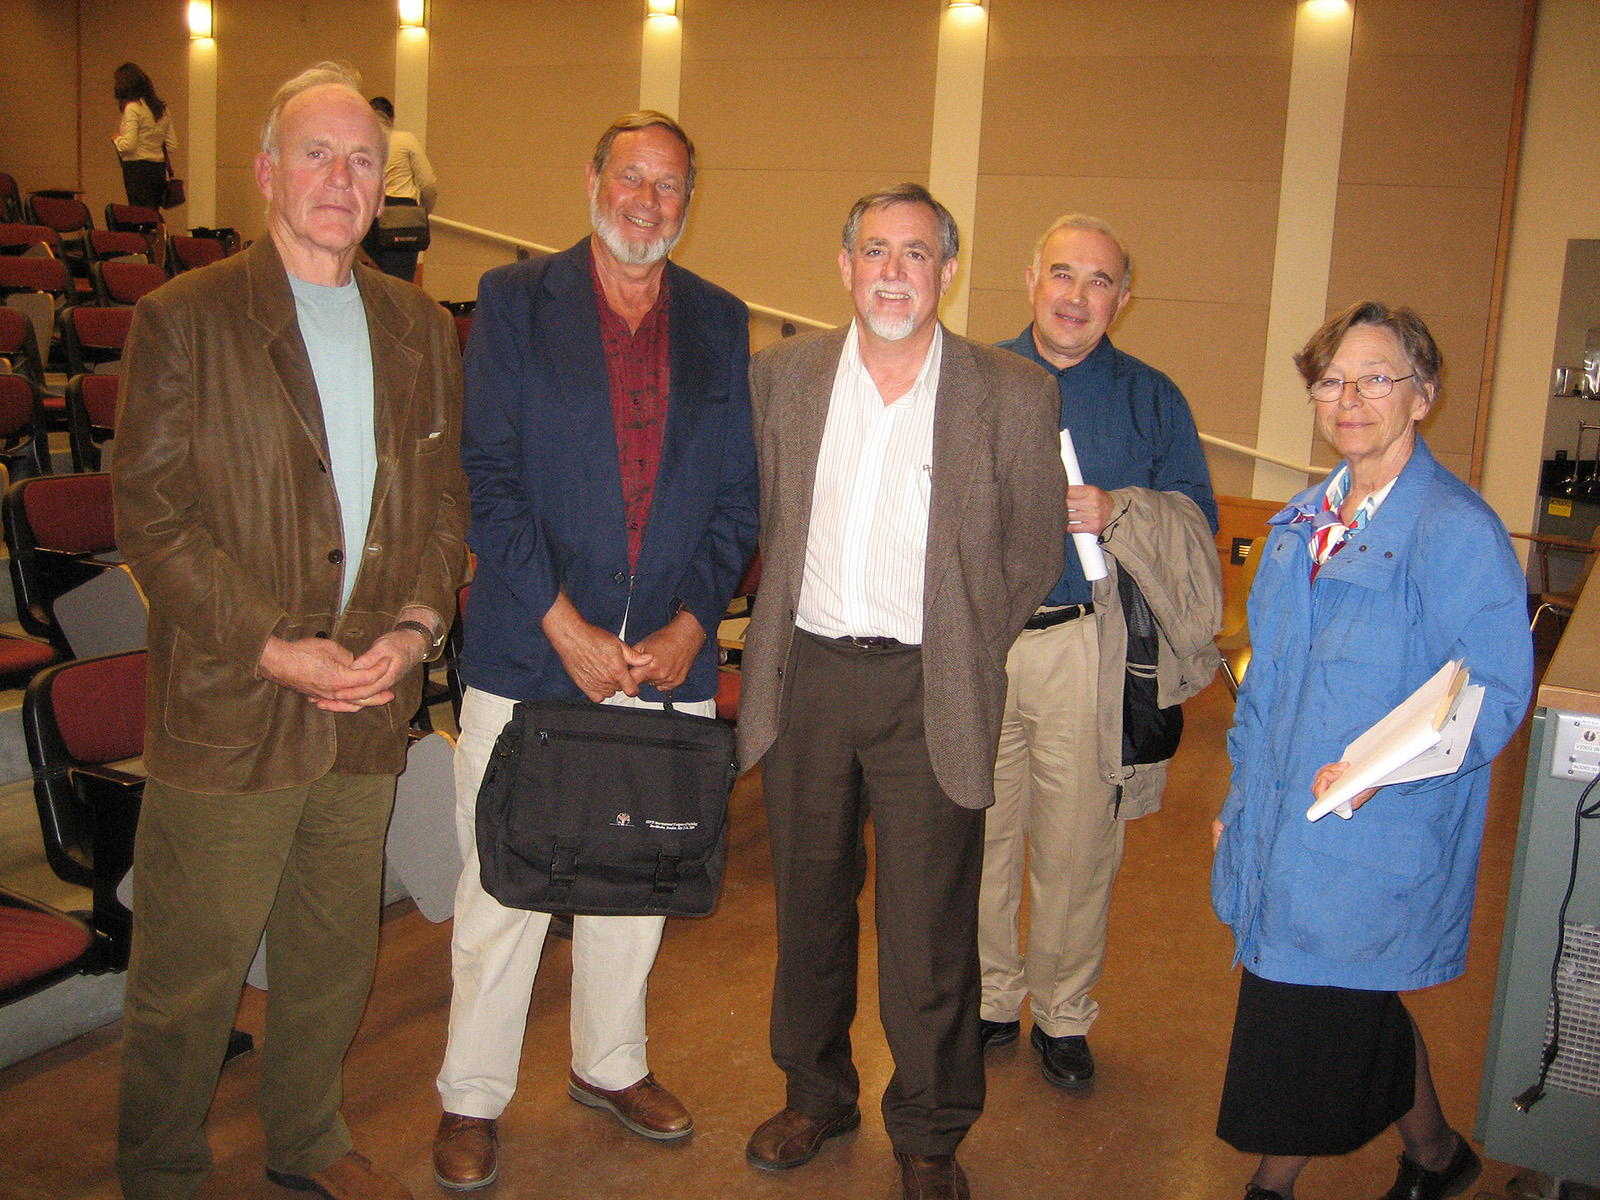 Psychology faculty circa 2005: (L-R): Walt Lonner, John Berry (visiting guest speaker), Dale Dinnel, George Cvetkovich, and Sue Hayes